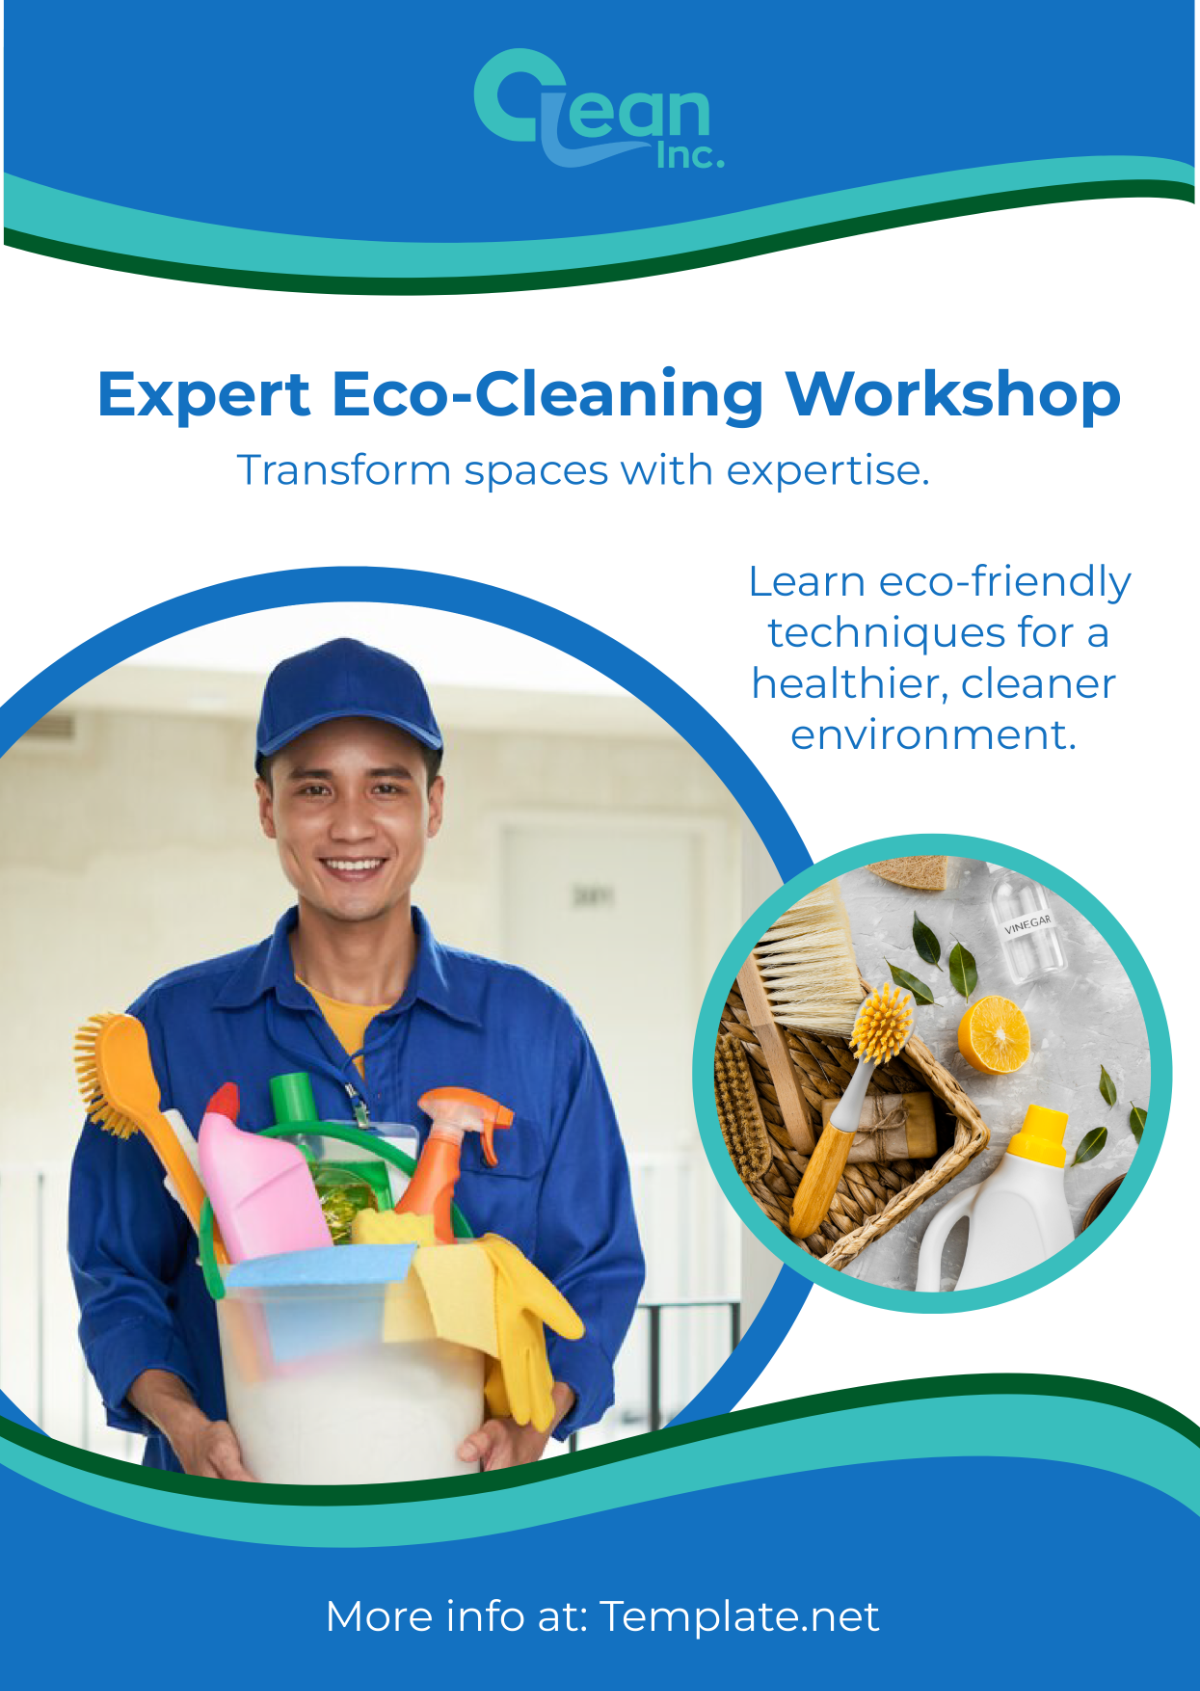 Free Cleaning Services Training Workshop Ad Template